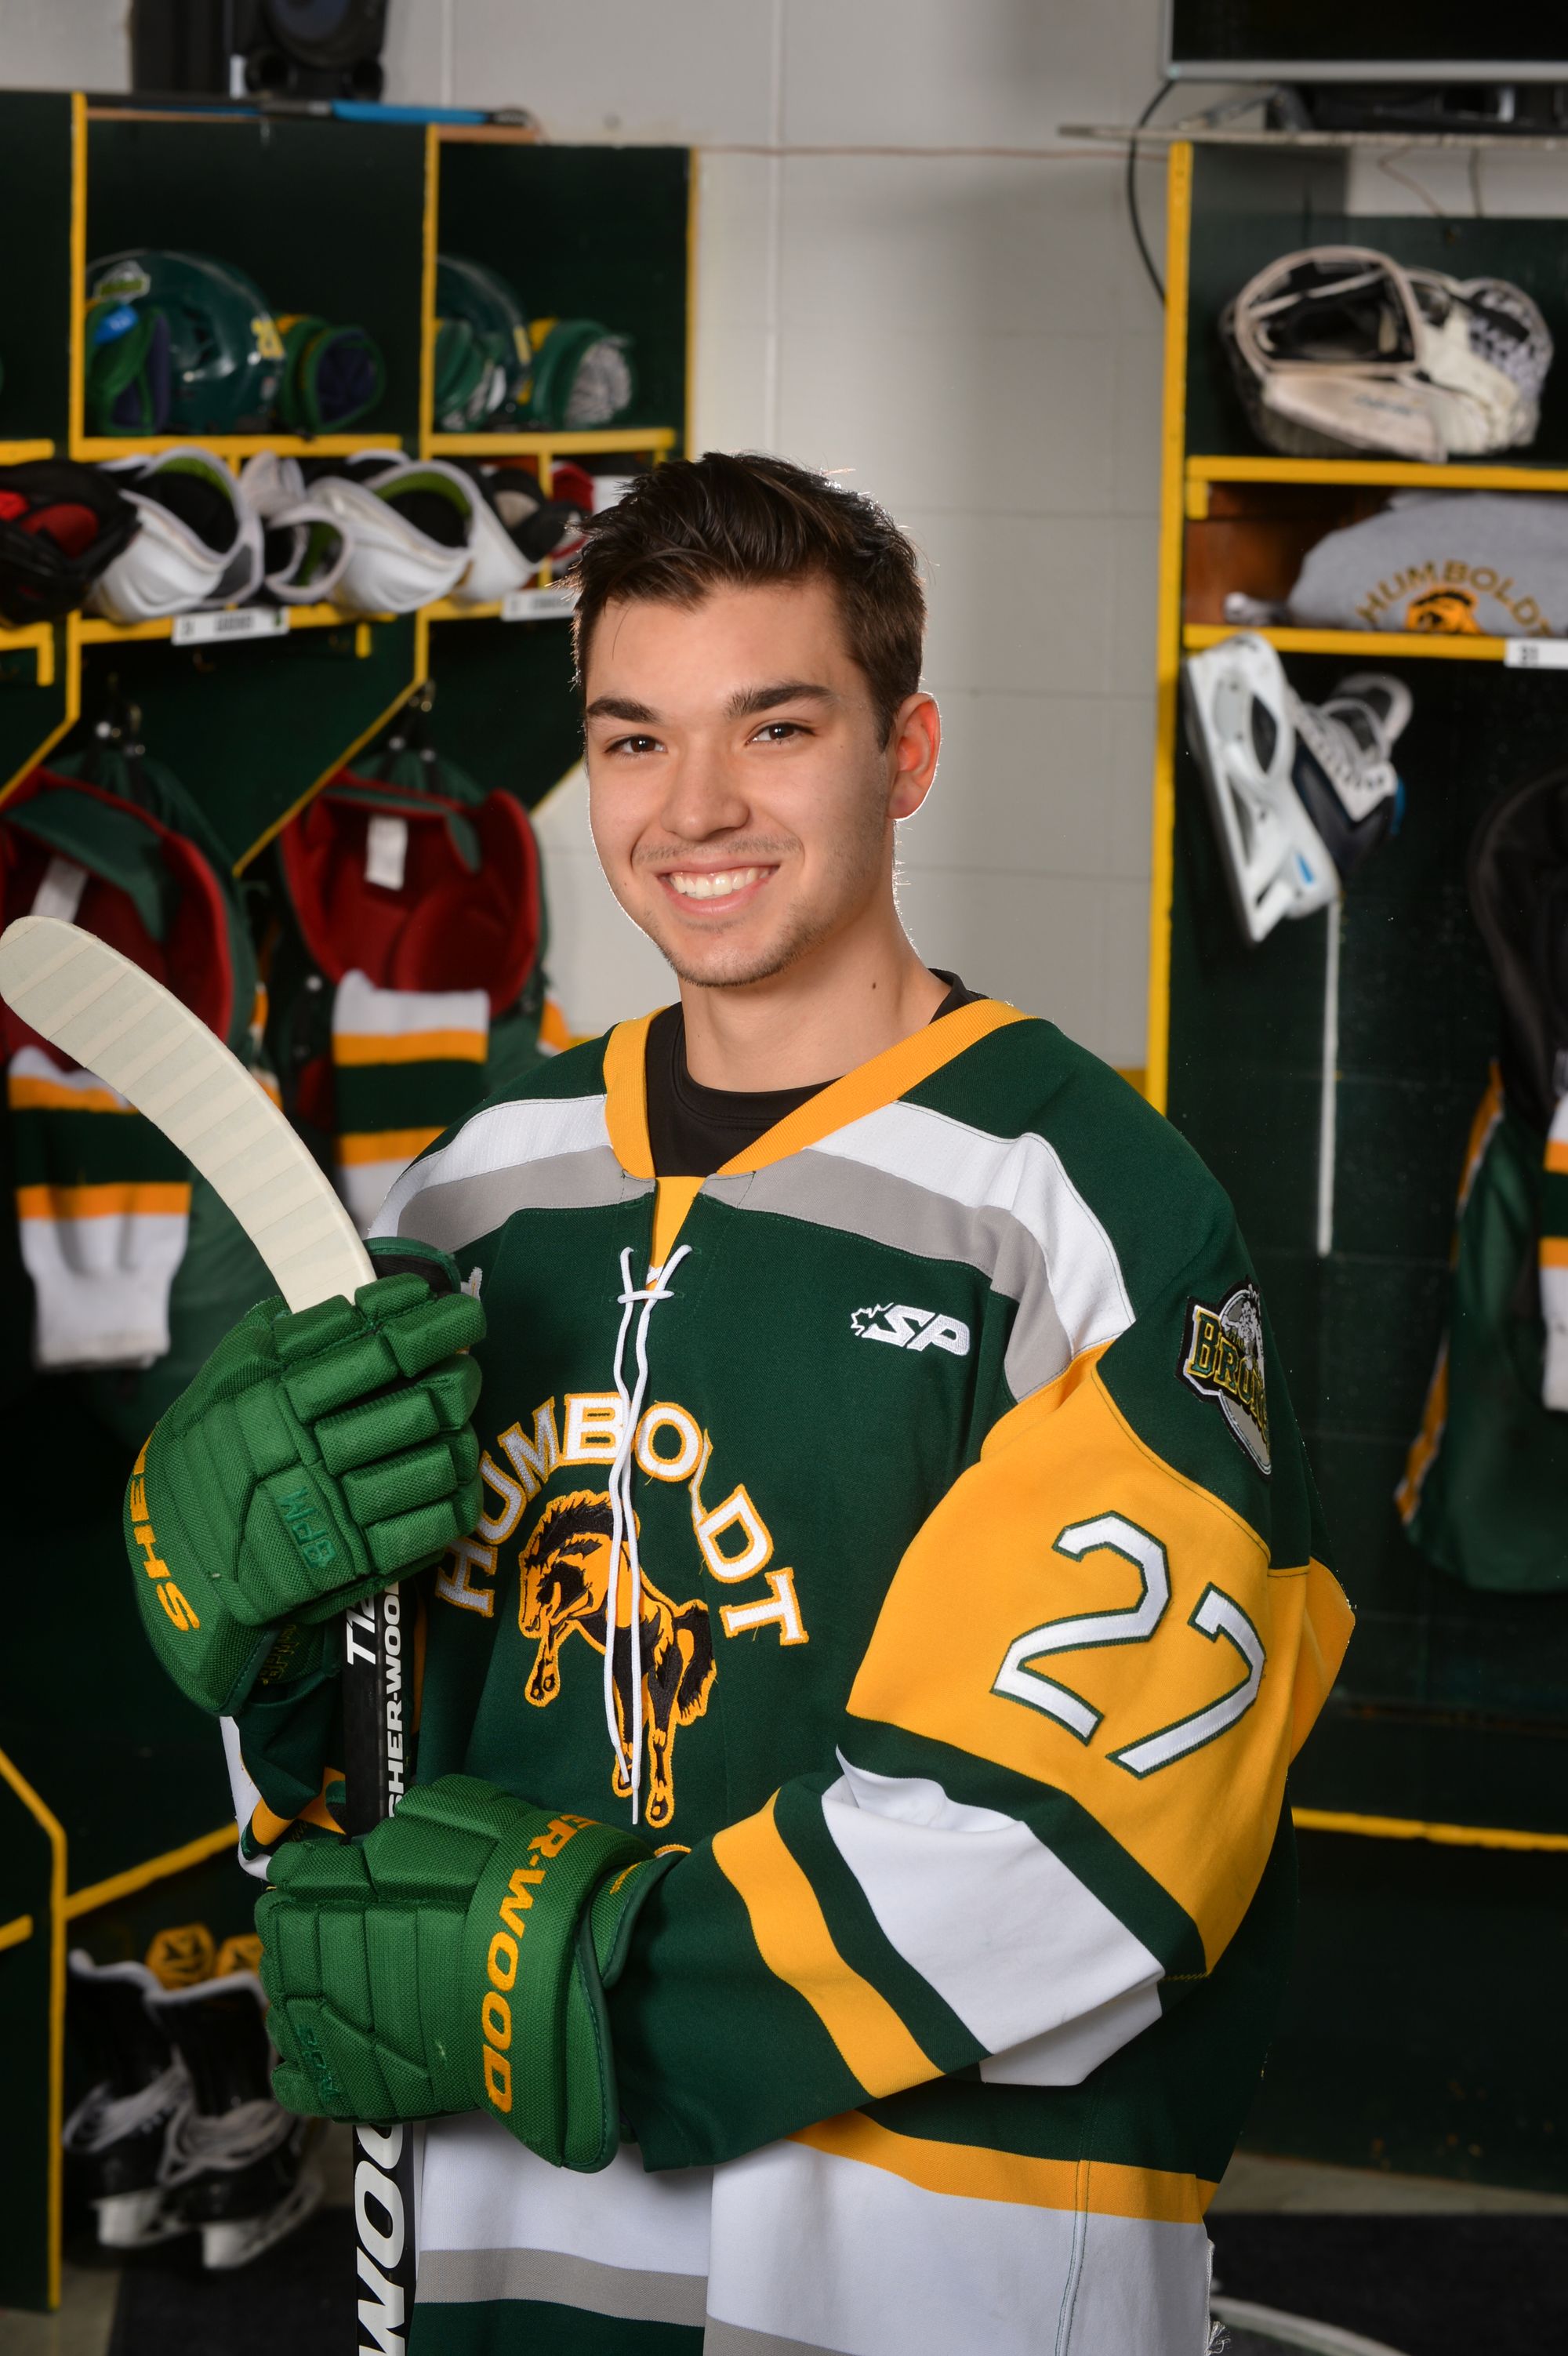 A young man wears a hockey jersey and holds a hockey stick. The jersey is yellow, green, and white with the number 27.